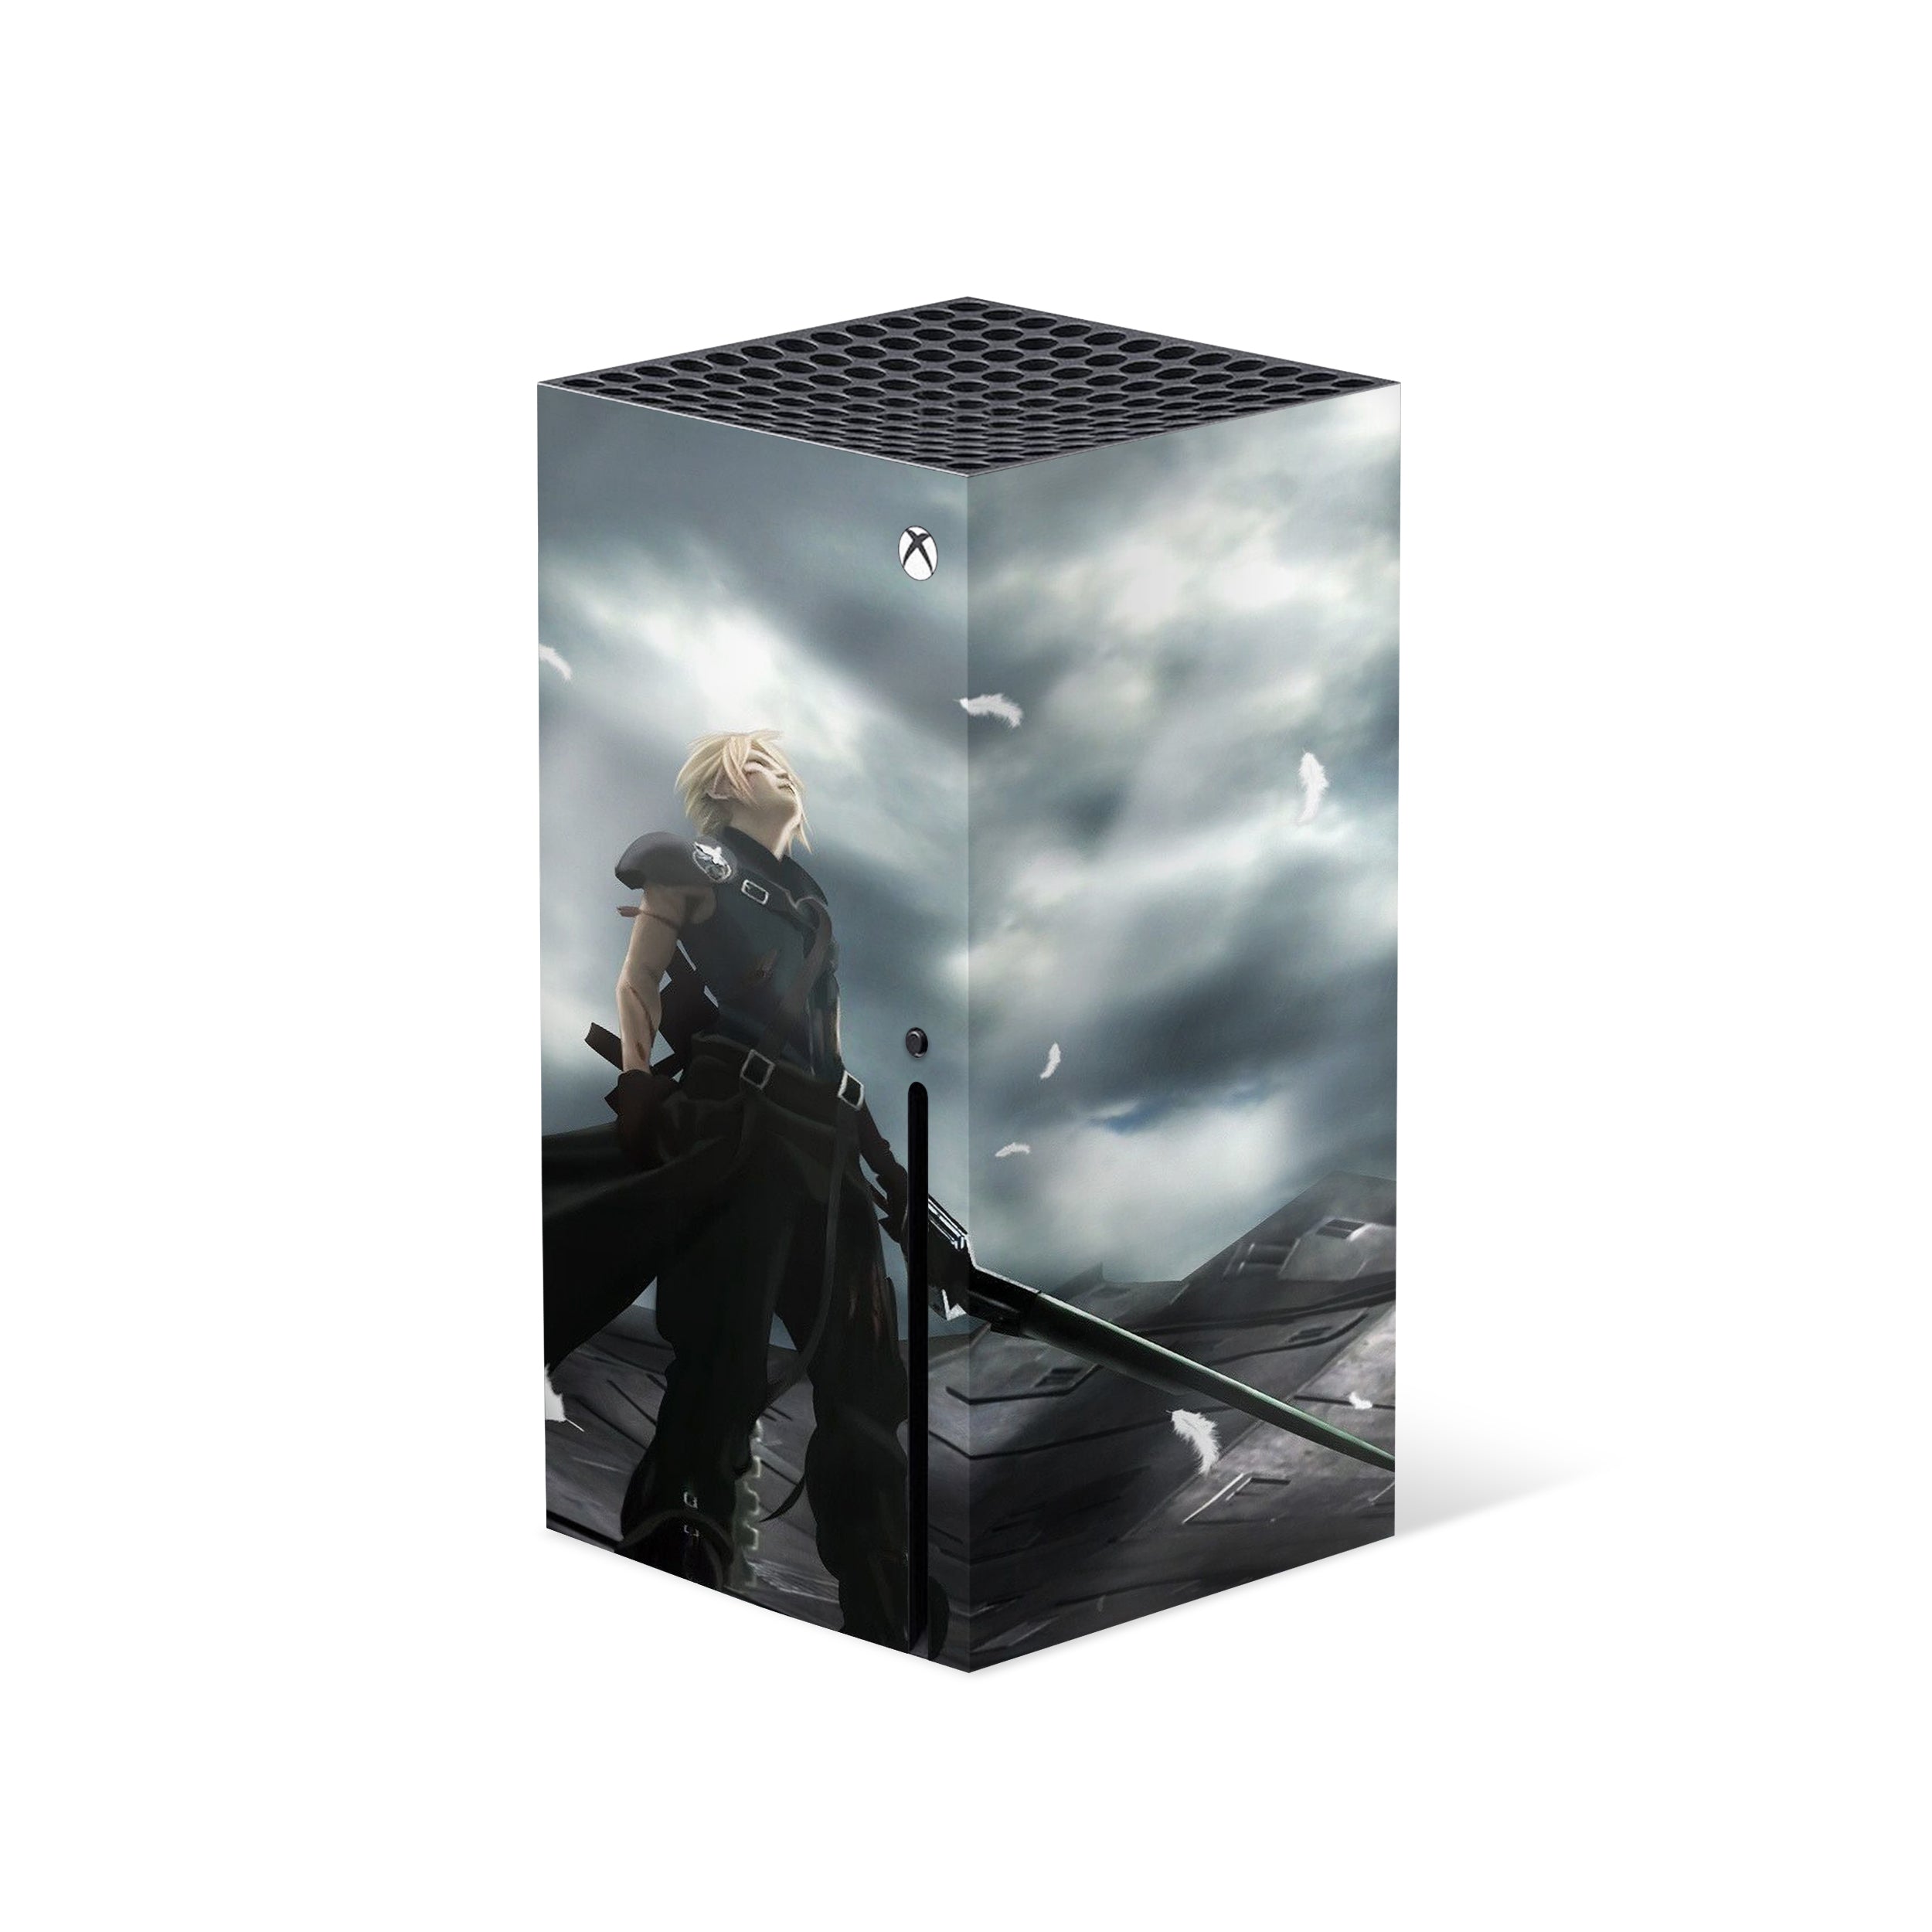 A video game skin featuring a Final Fantasy 7 Cloud Reborn design for the Xbox Series X.